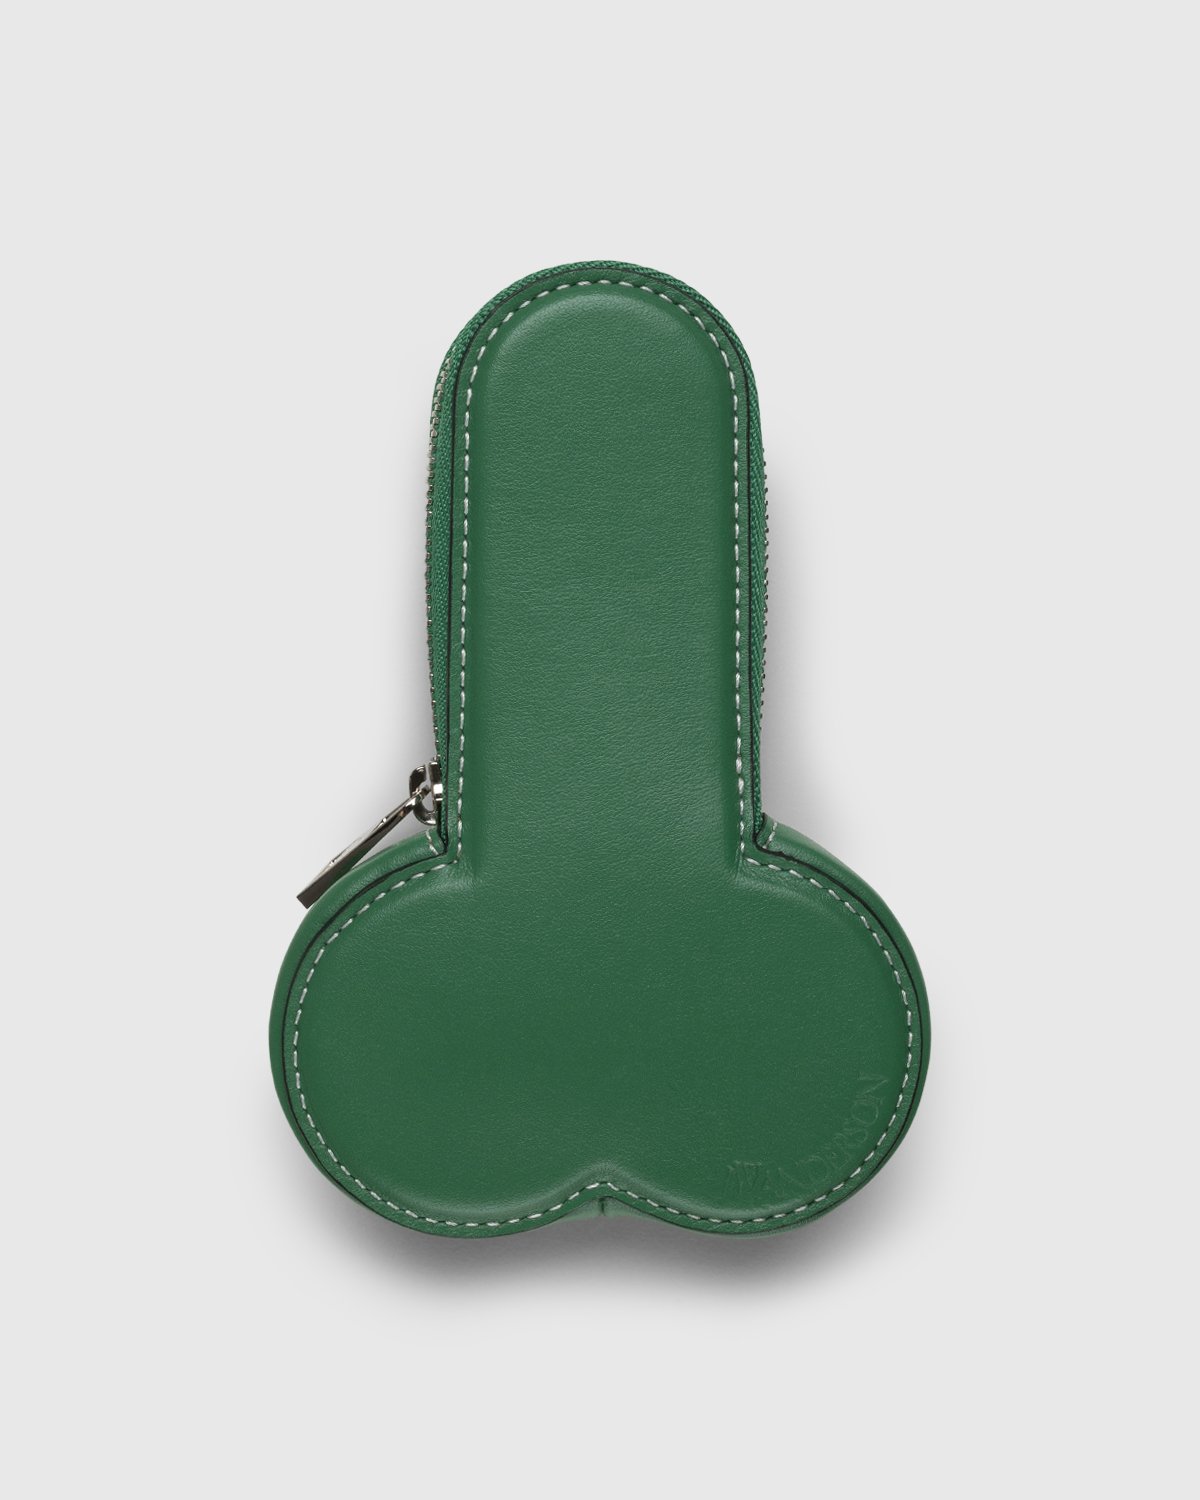 J.W. Anderson - Penis Coin Purse Green - Accessories - Green - Image 2